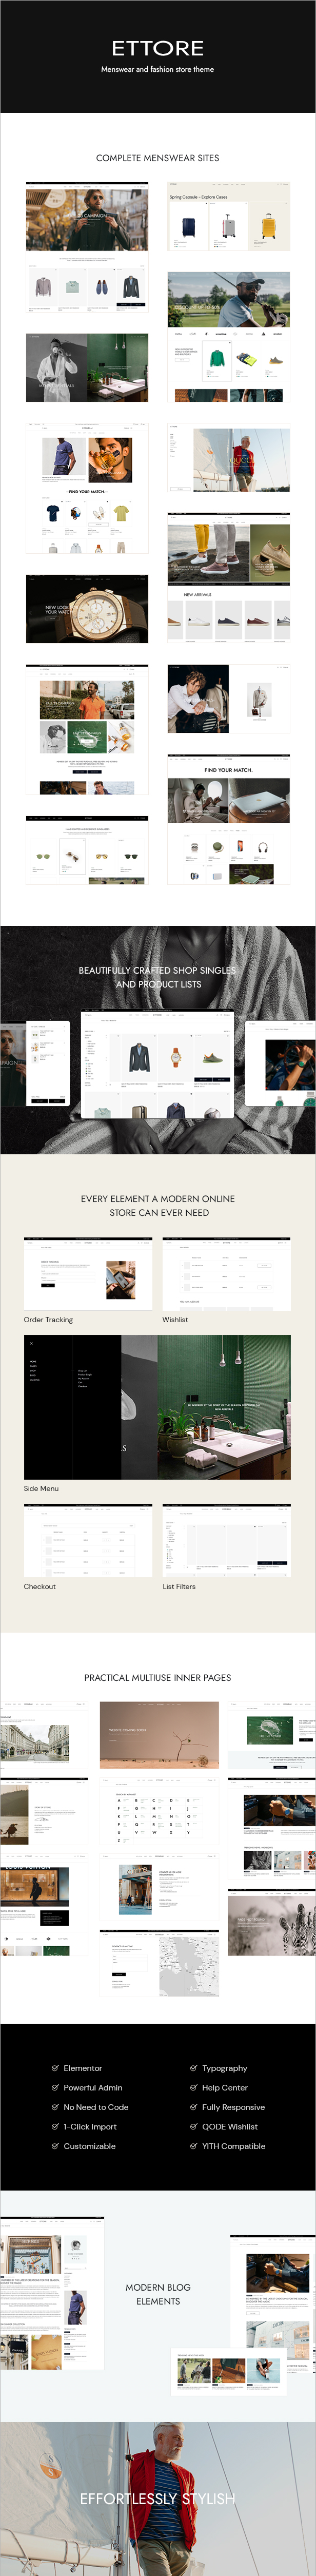 Ettore - Fashion Store and Menswear WooCommerce Theme - 2